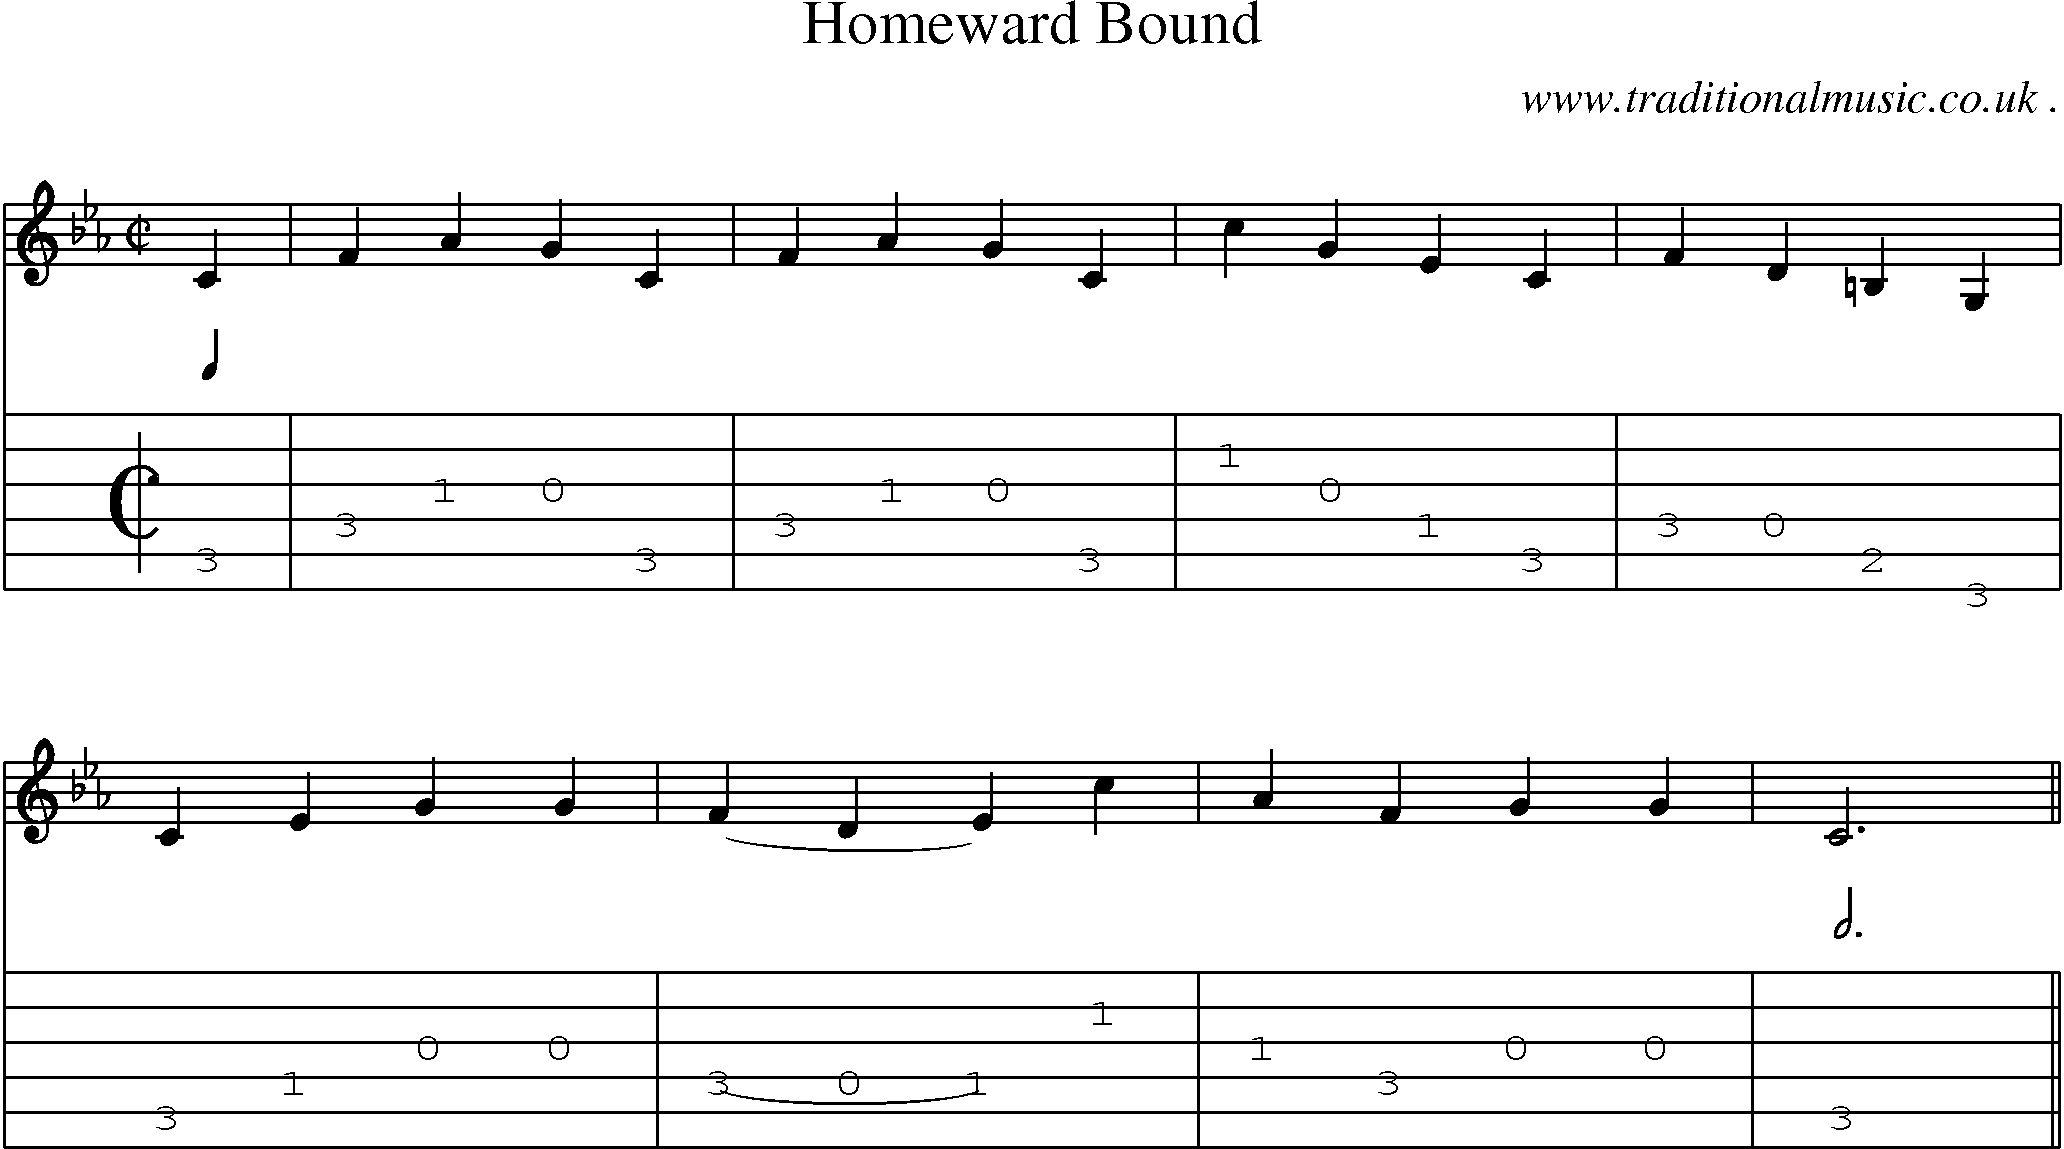 Sheet-Music and Guitar Tabs for Homeward Bound